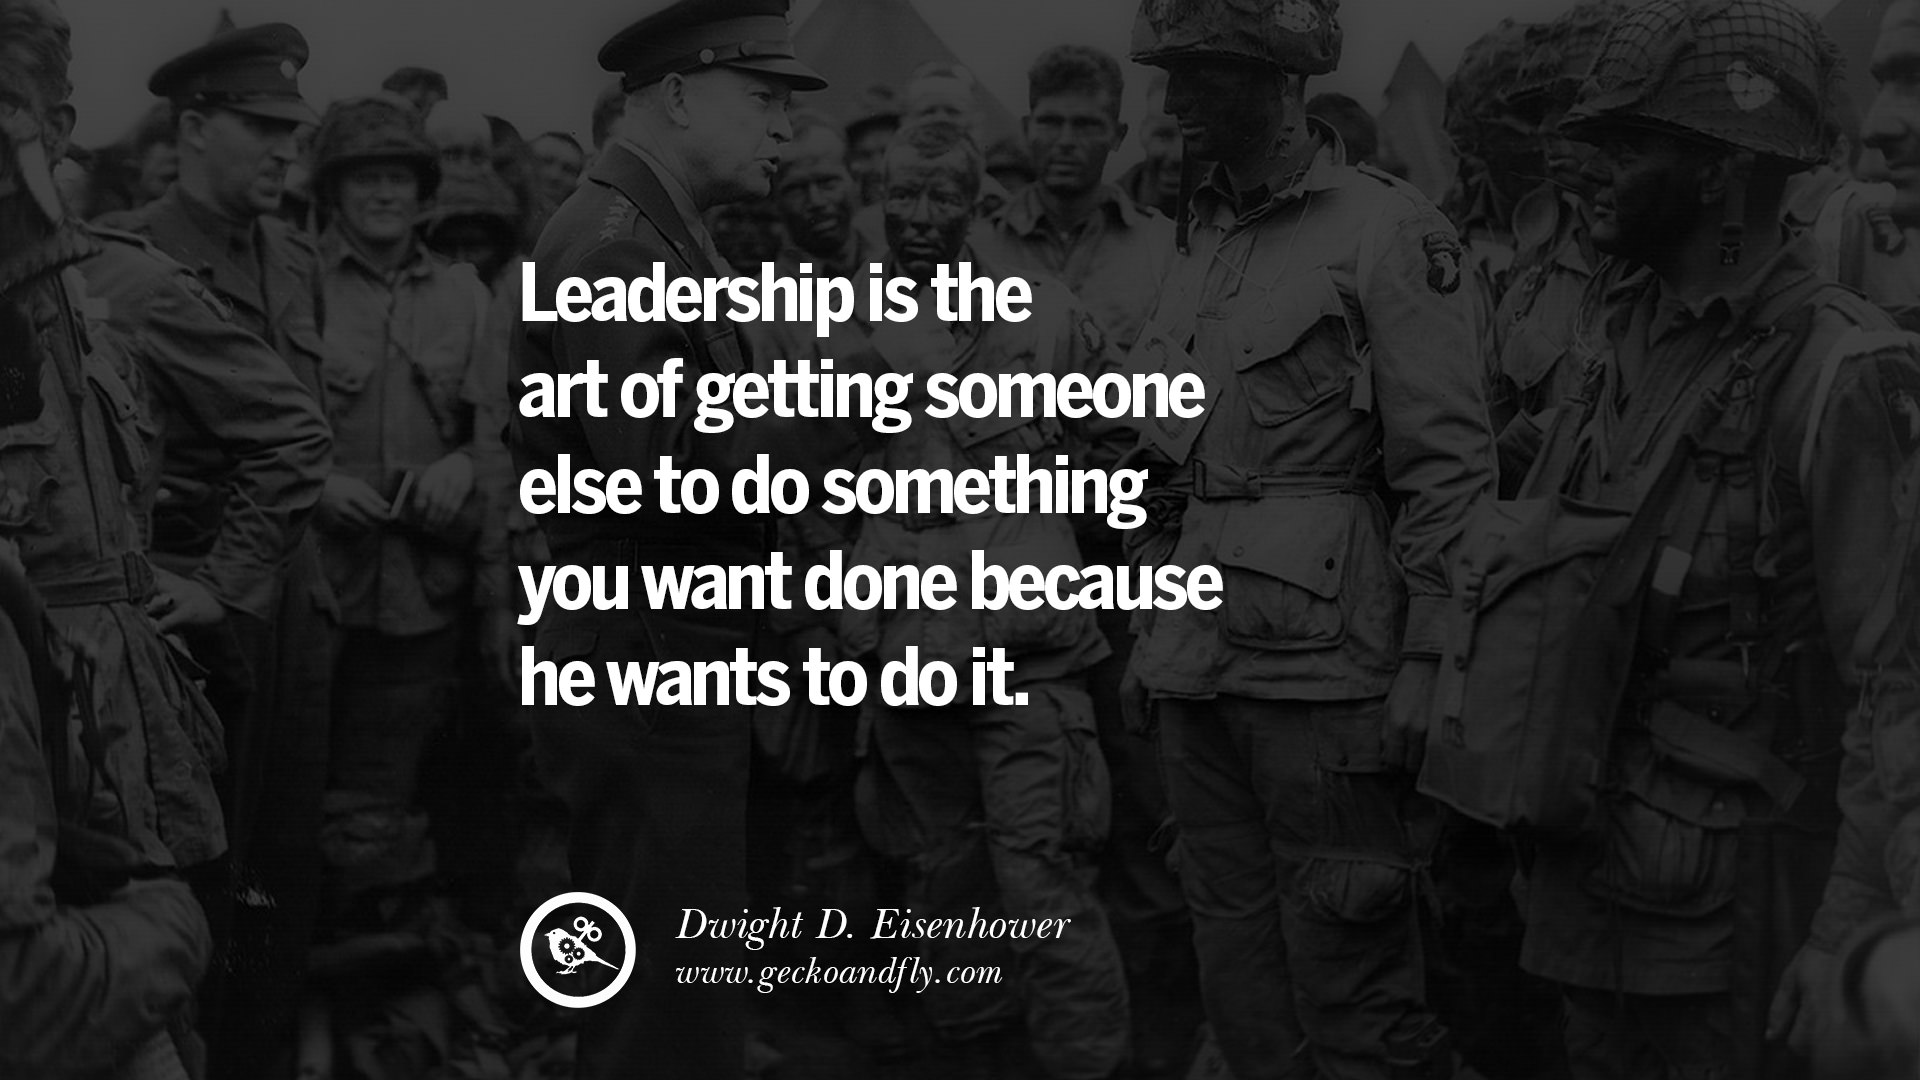 something  you of quotes inspirational do want Leadership someone to  else military leaders is by  the getting art